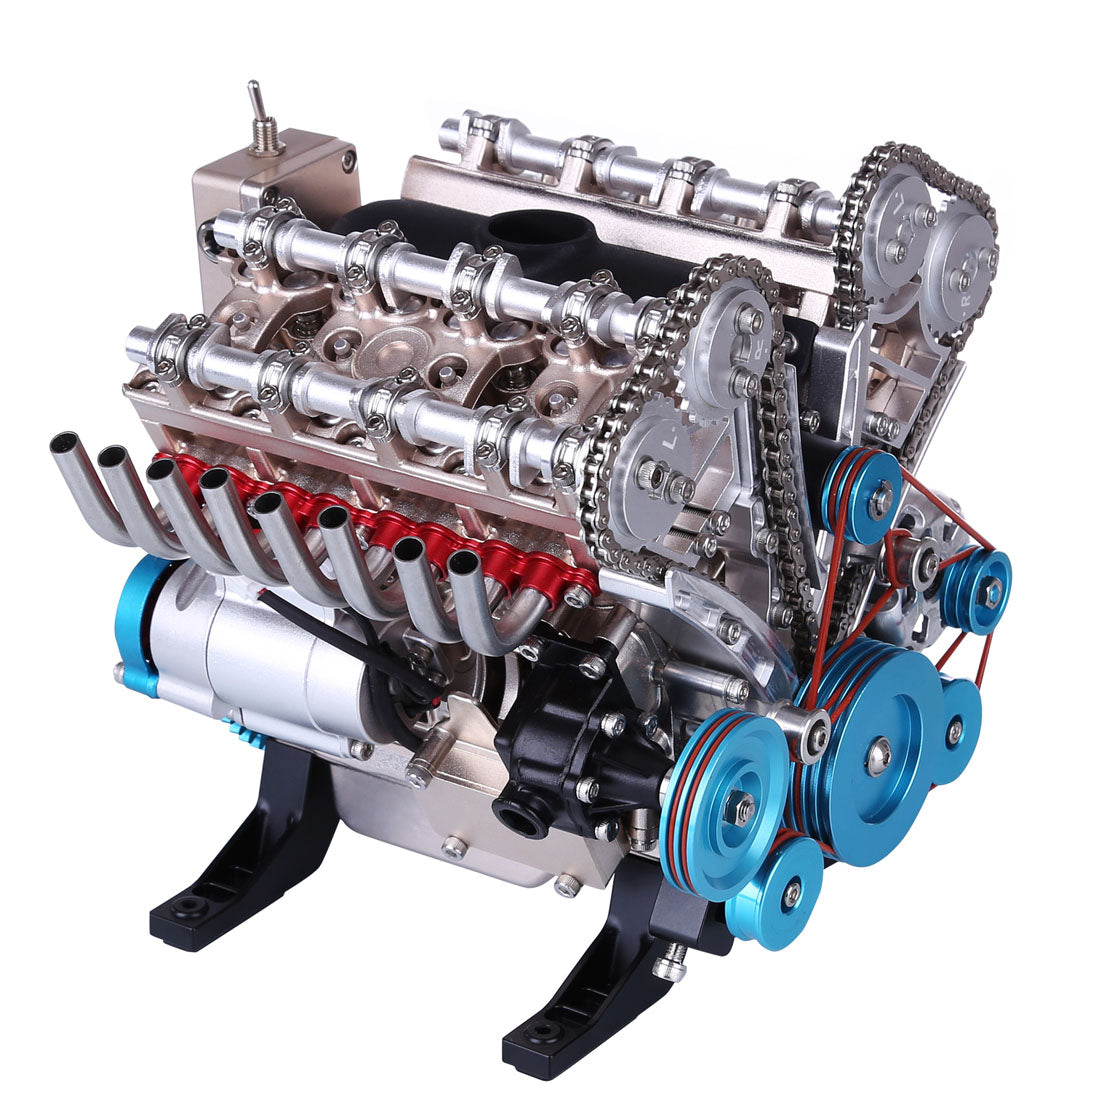 V8 Engine TECHING 3D Metal Mechanical Engine Model Science Experiment Boys Toy 500+Pcs